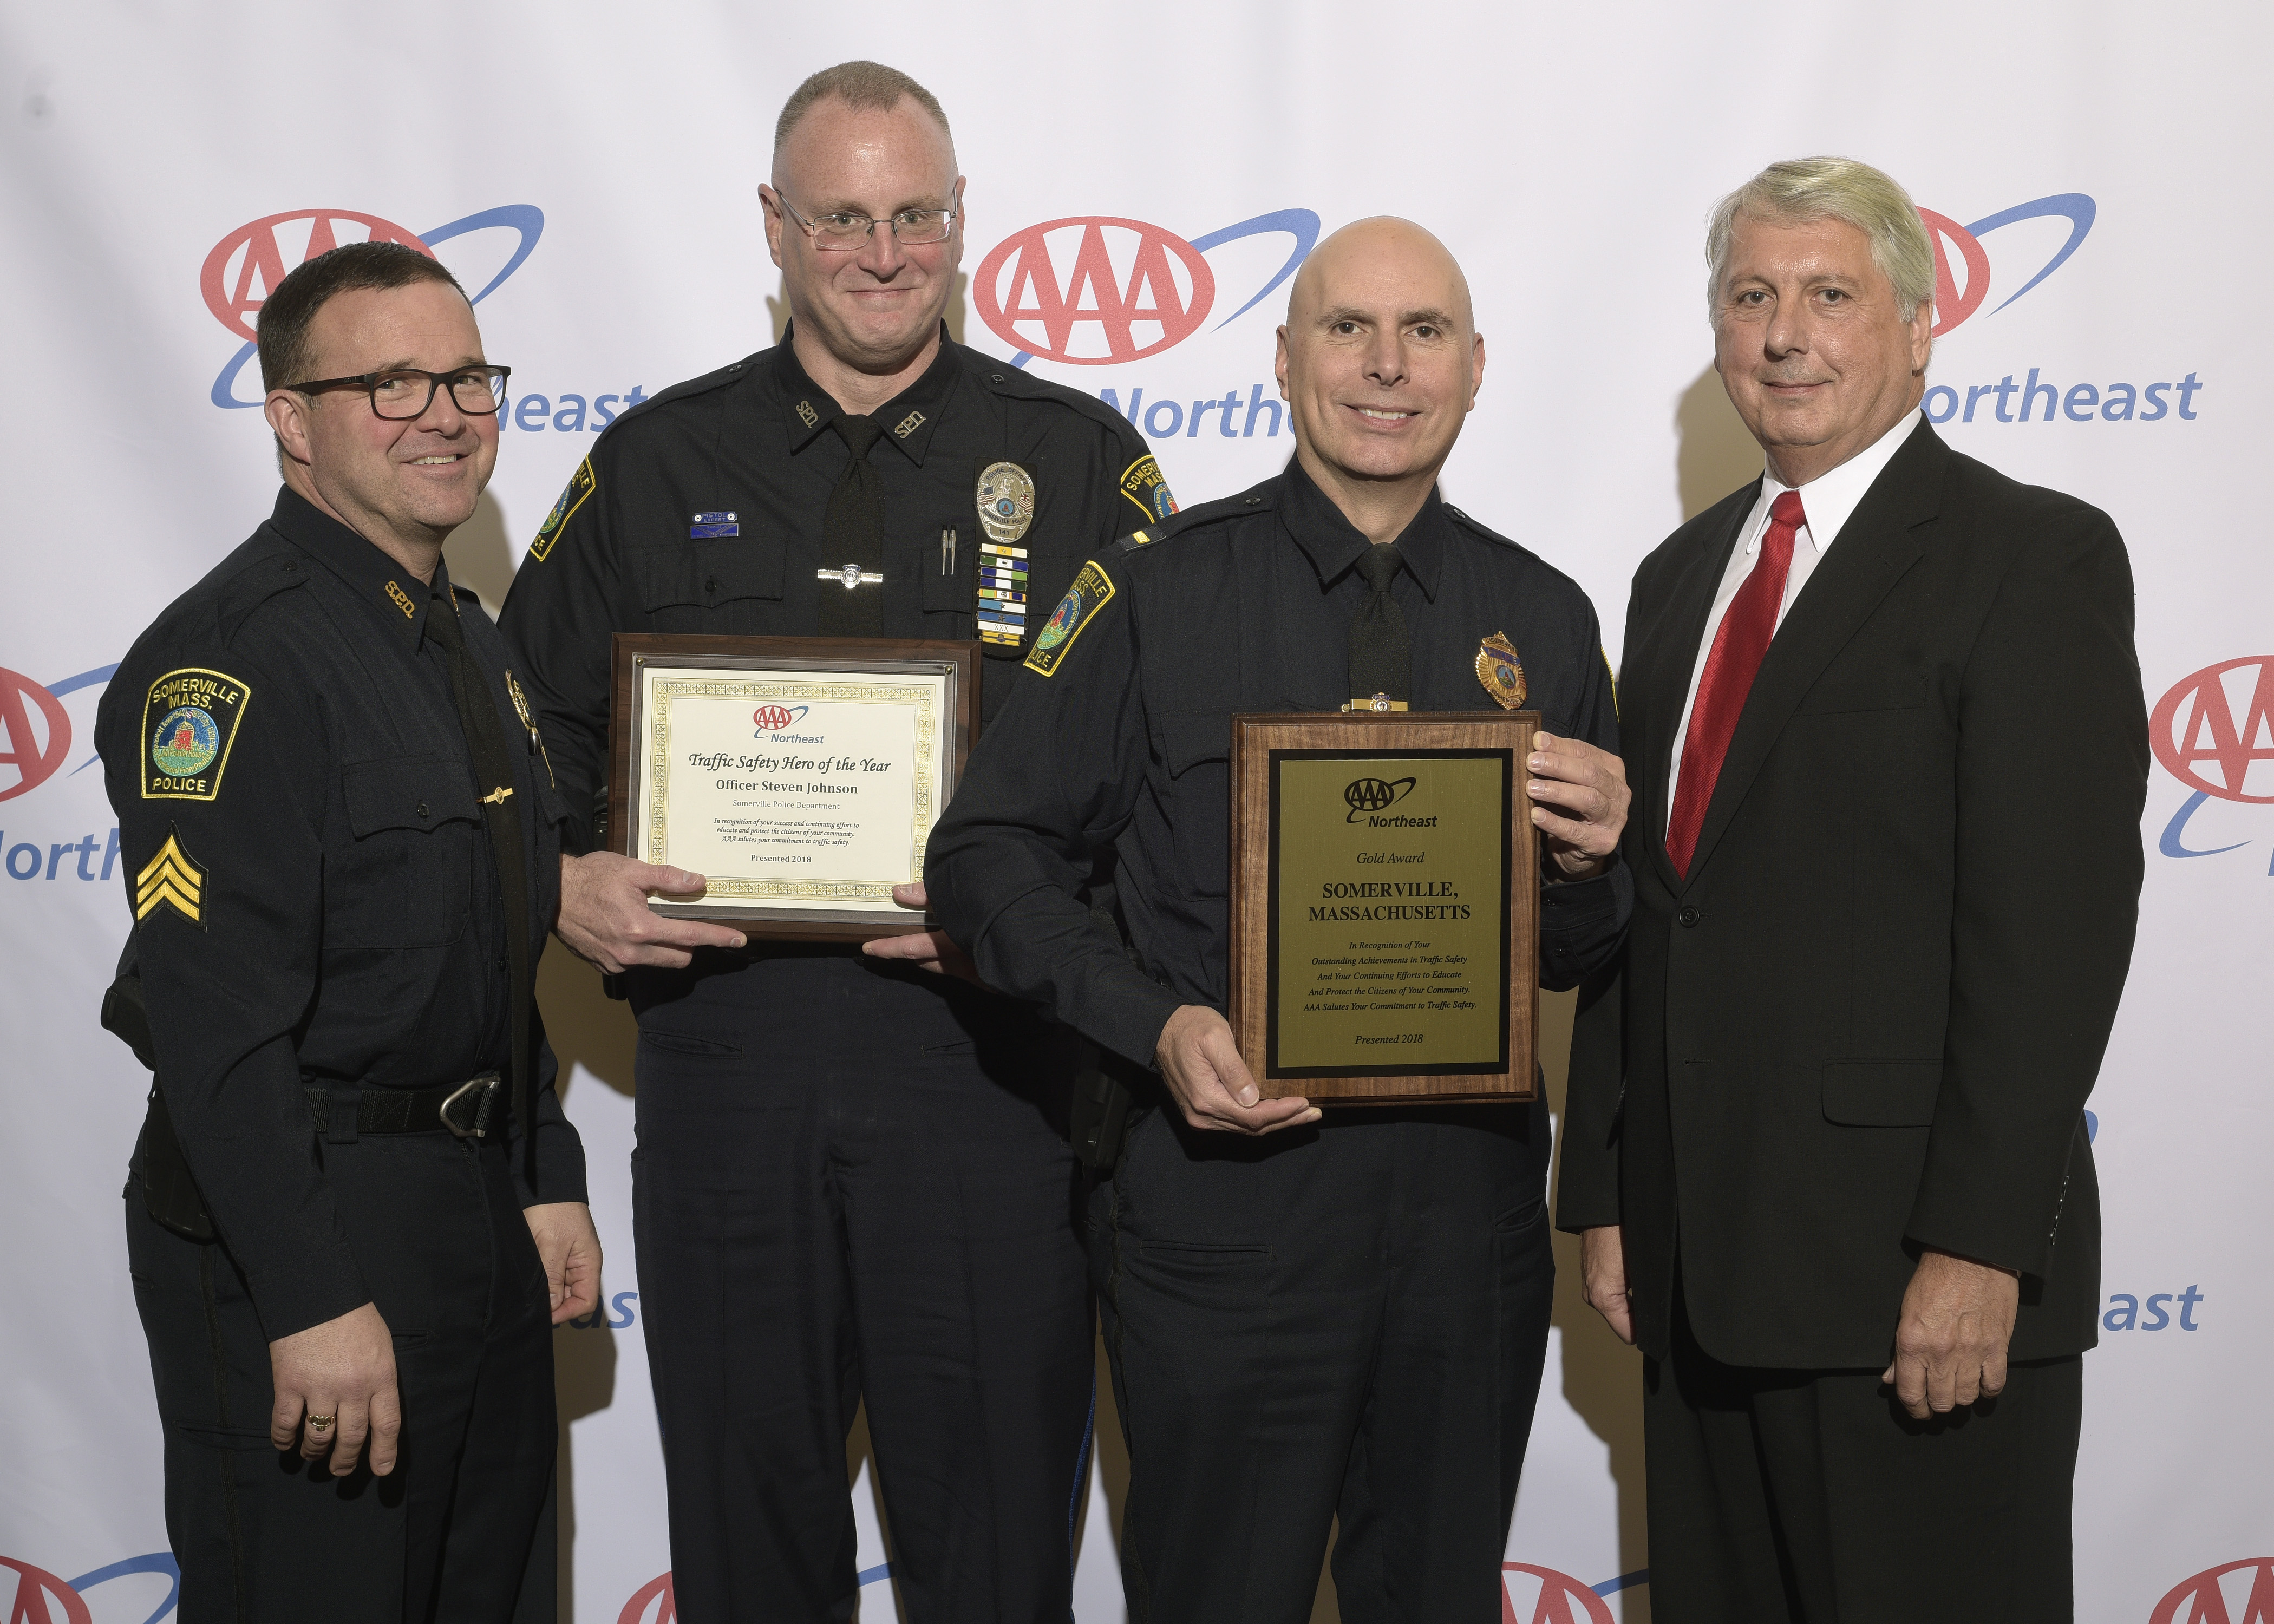 AAA Northeast Gold Award given to Somerville Police in recognition of outstanding achievements in traffic safety and education efforts